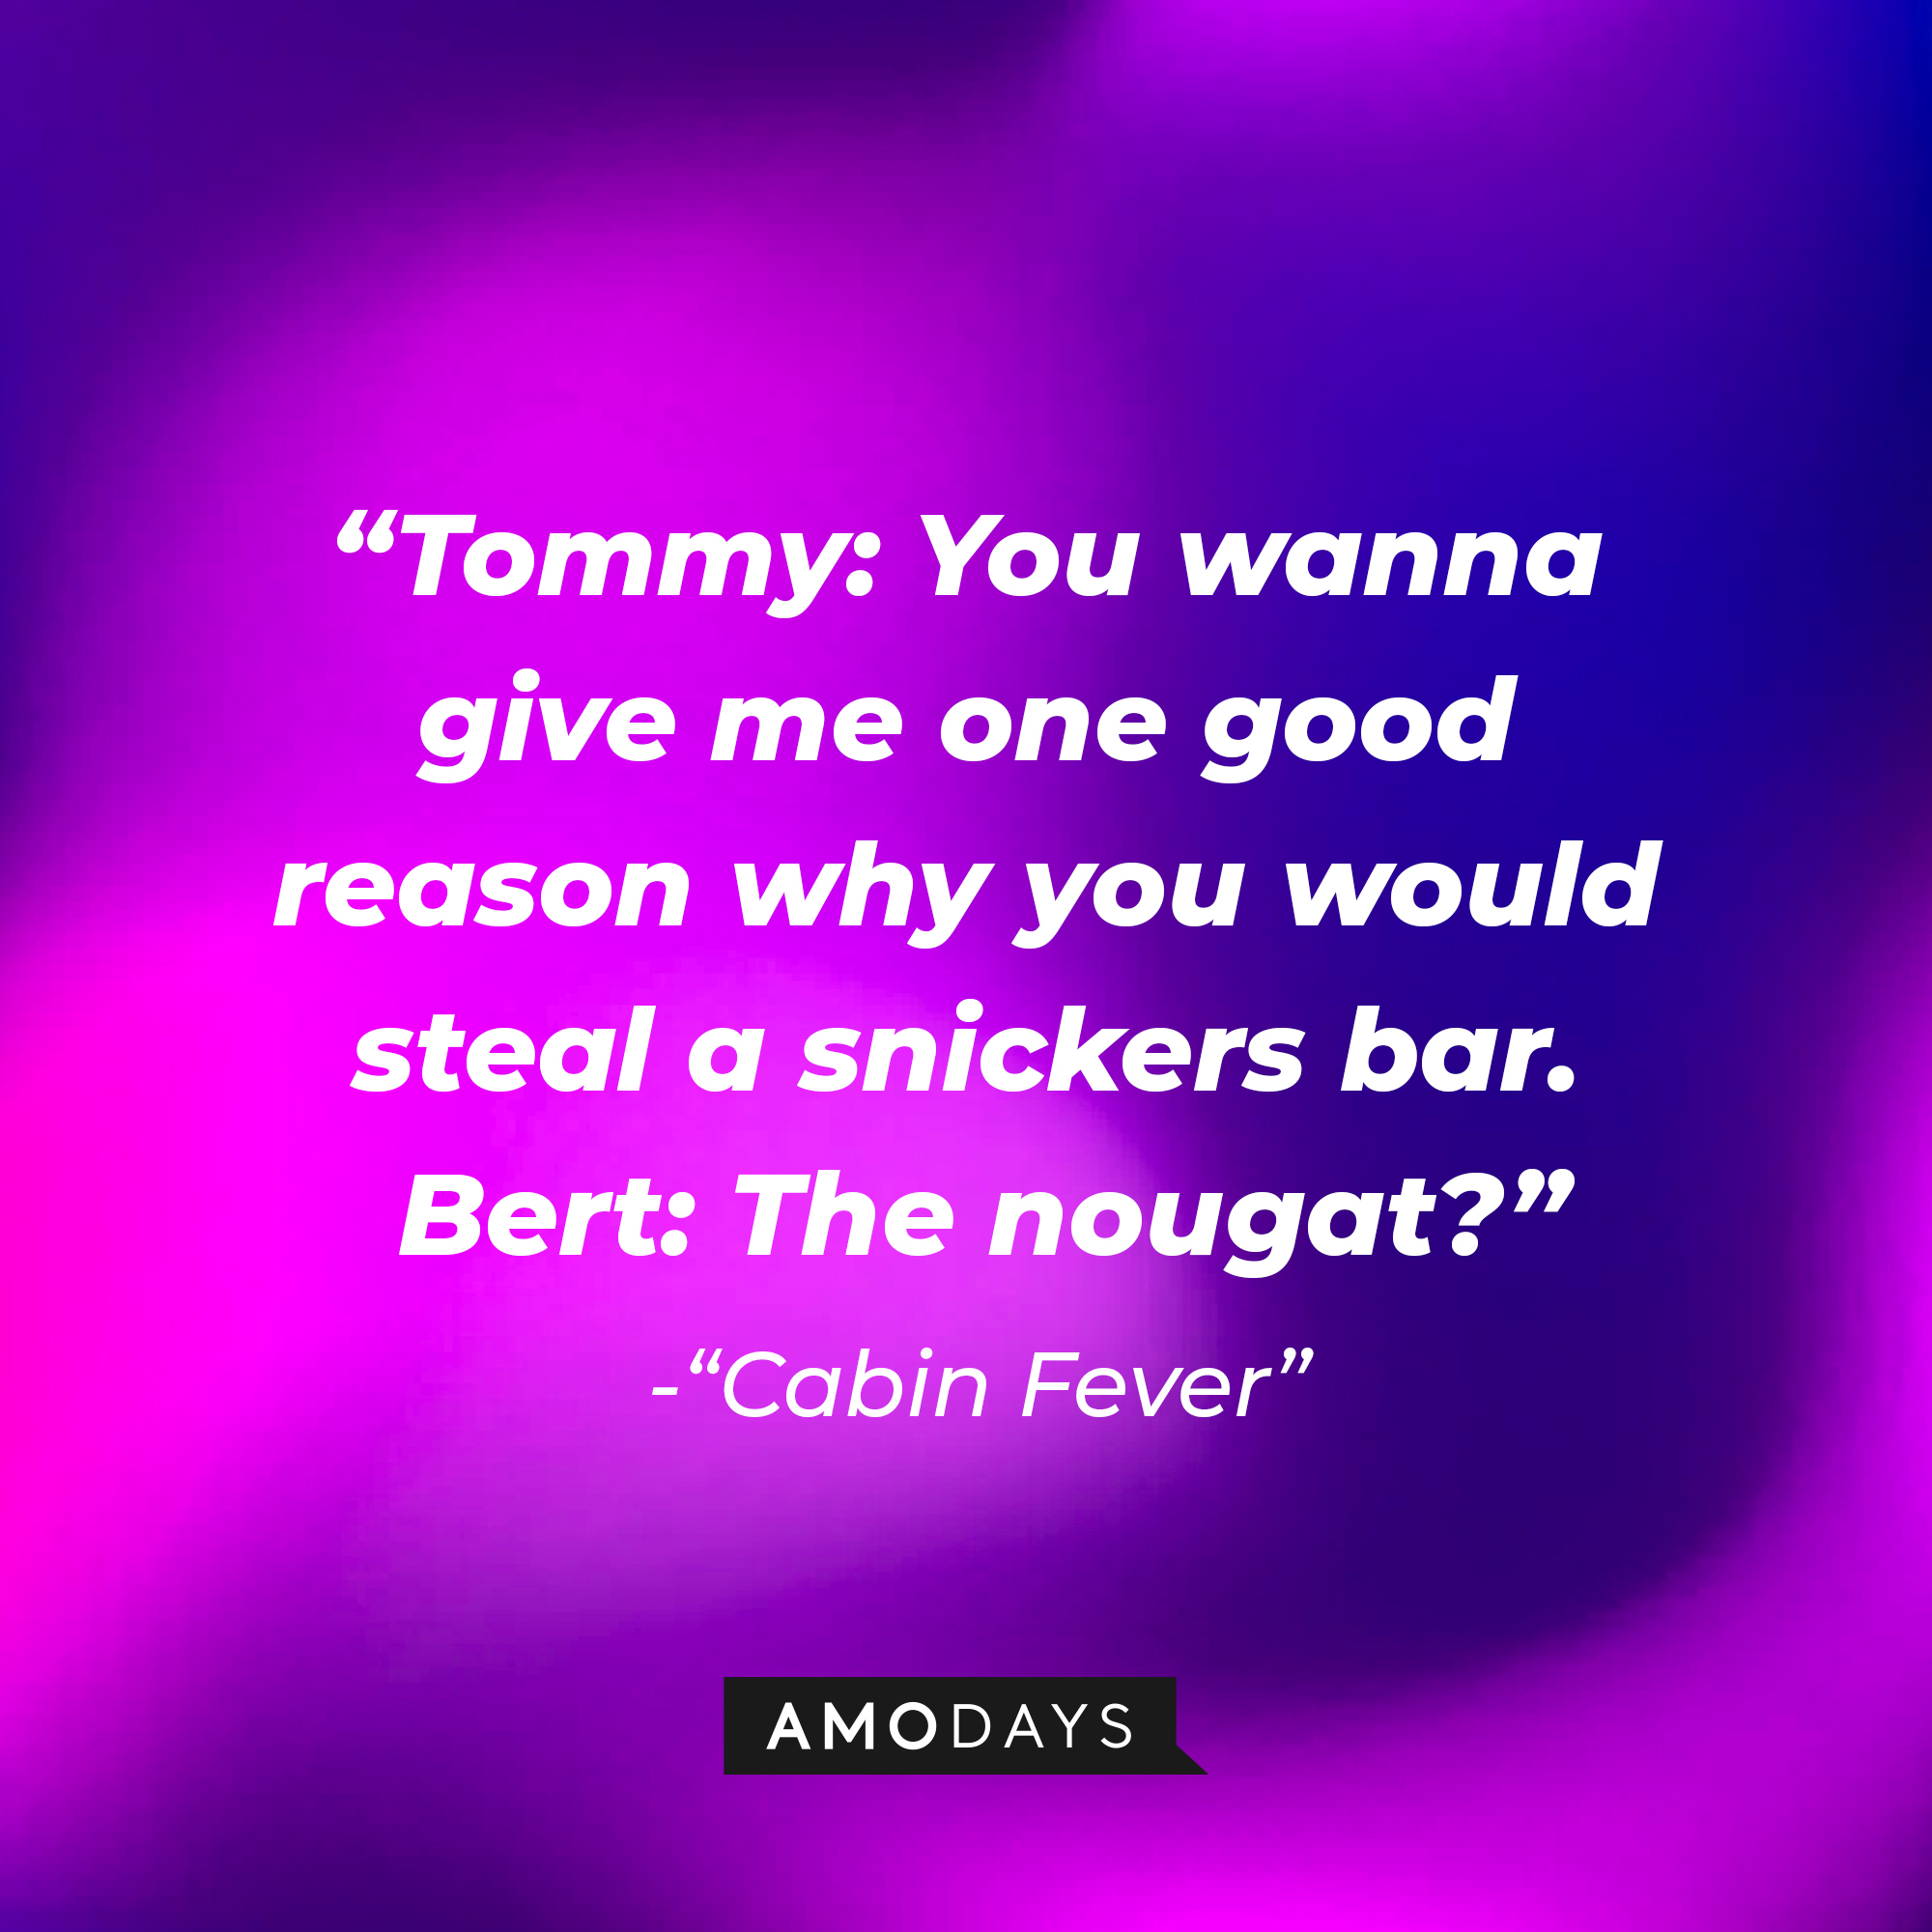 Tommy and Bert's dialogue from "Cabin Fever:" “Tommy: You wanna give me one good reason why you would steal a snickers bar. ; Bert: The nougat?” | Source: AmoDays